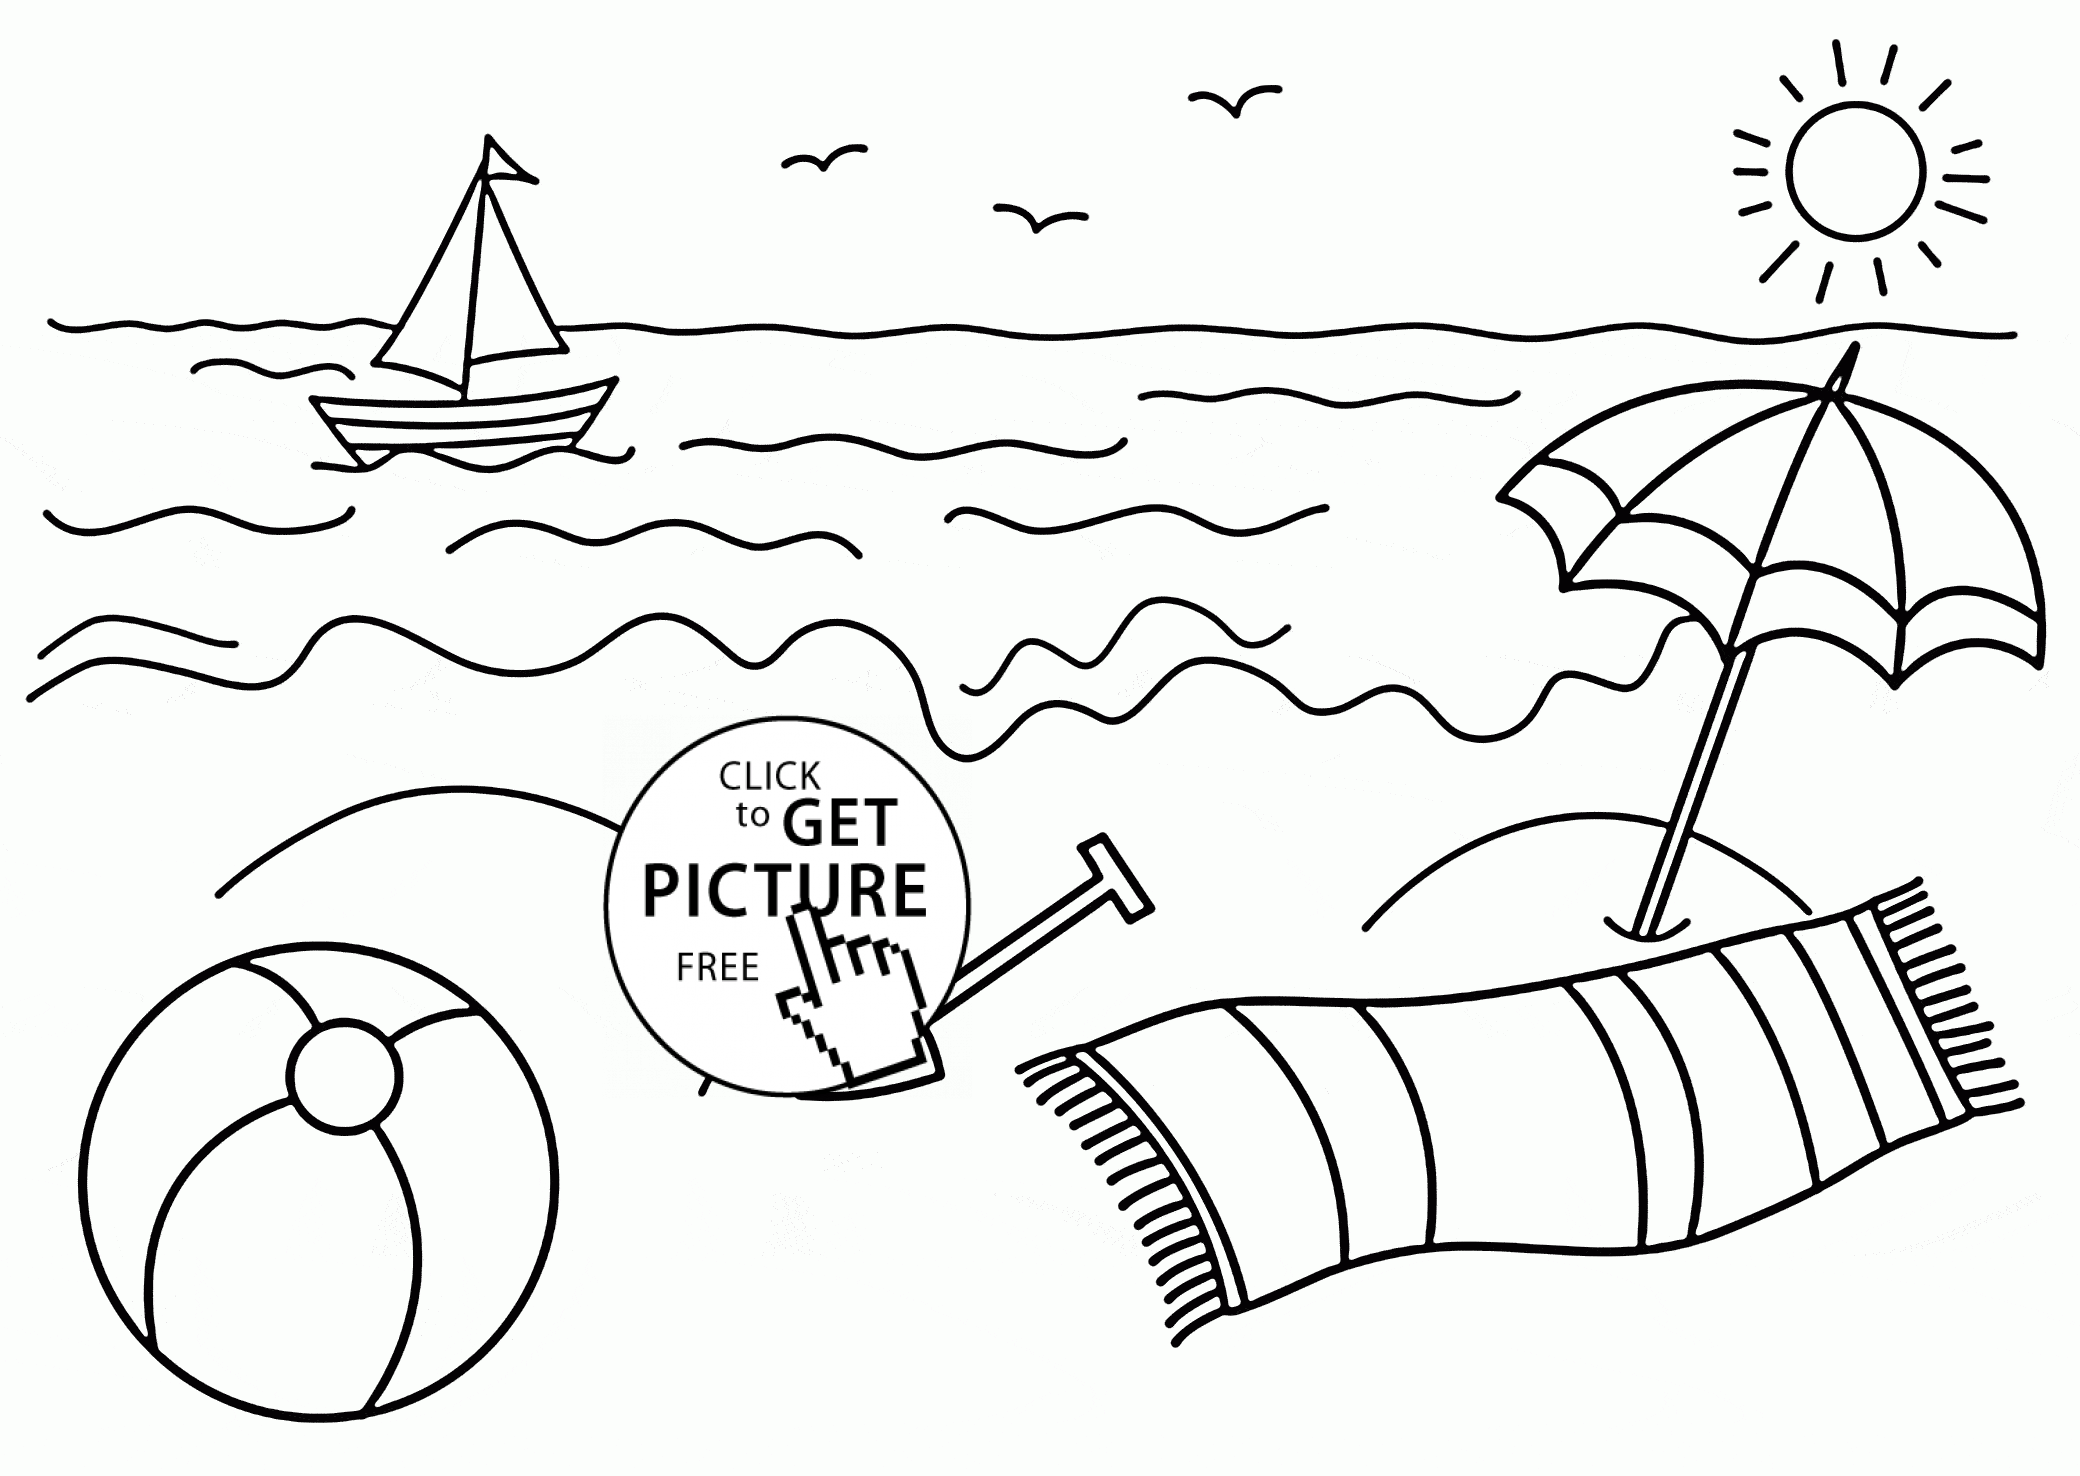 Download Small Boat And Beach Coloring Page For Kids, Seasons ...